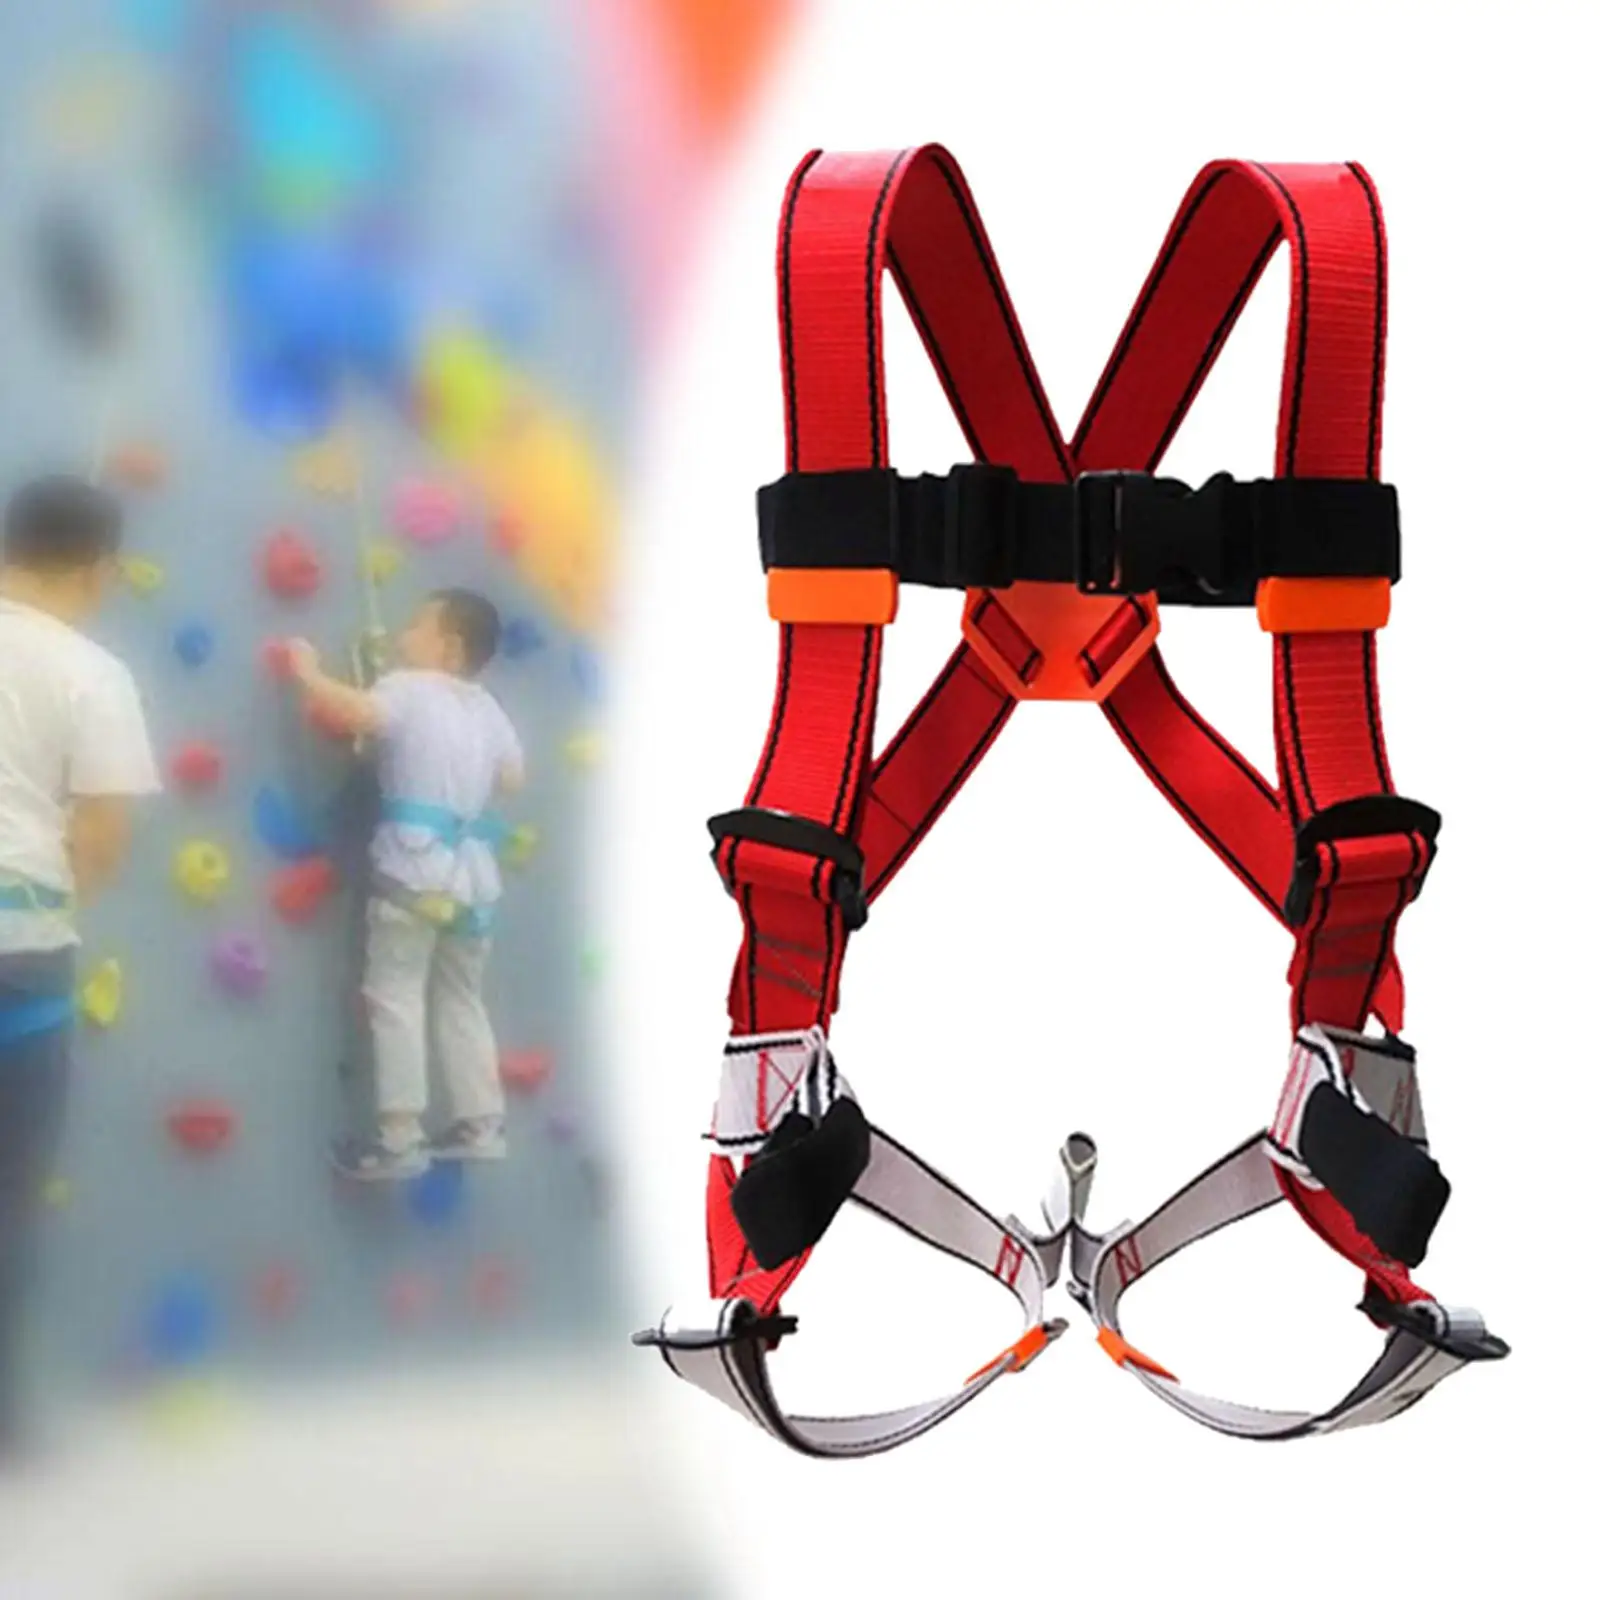 Wider Rock Climbing Harnesses Safety Equipment  Full Body Professional Waist Leg Belts for Caving Arborist Tree Outdoor  Adults